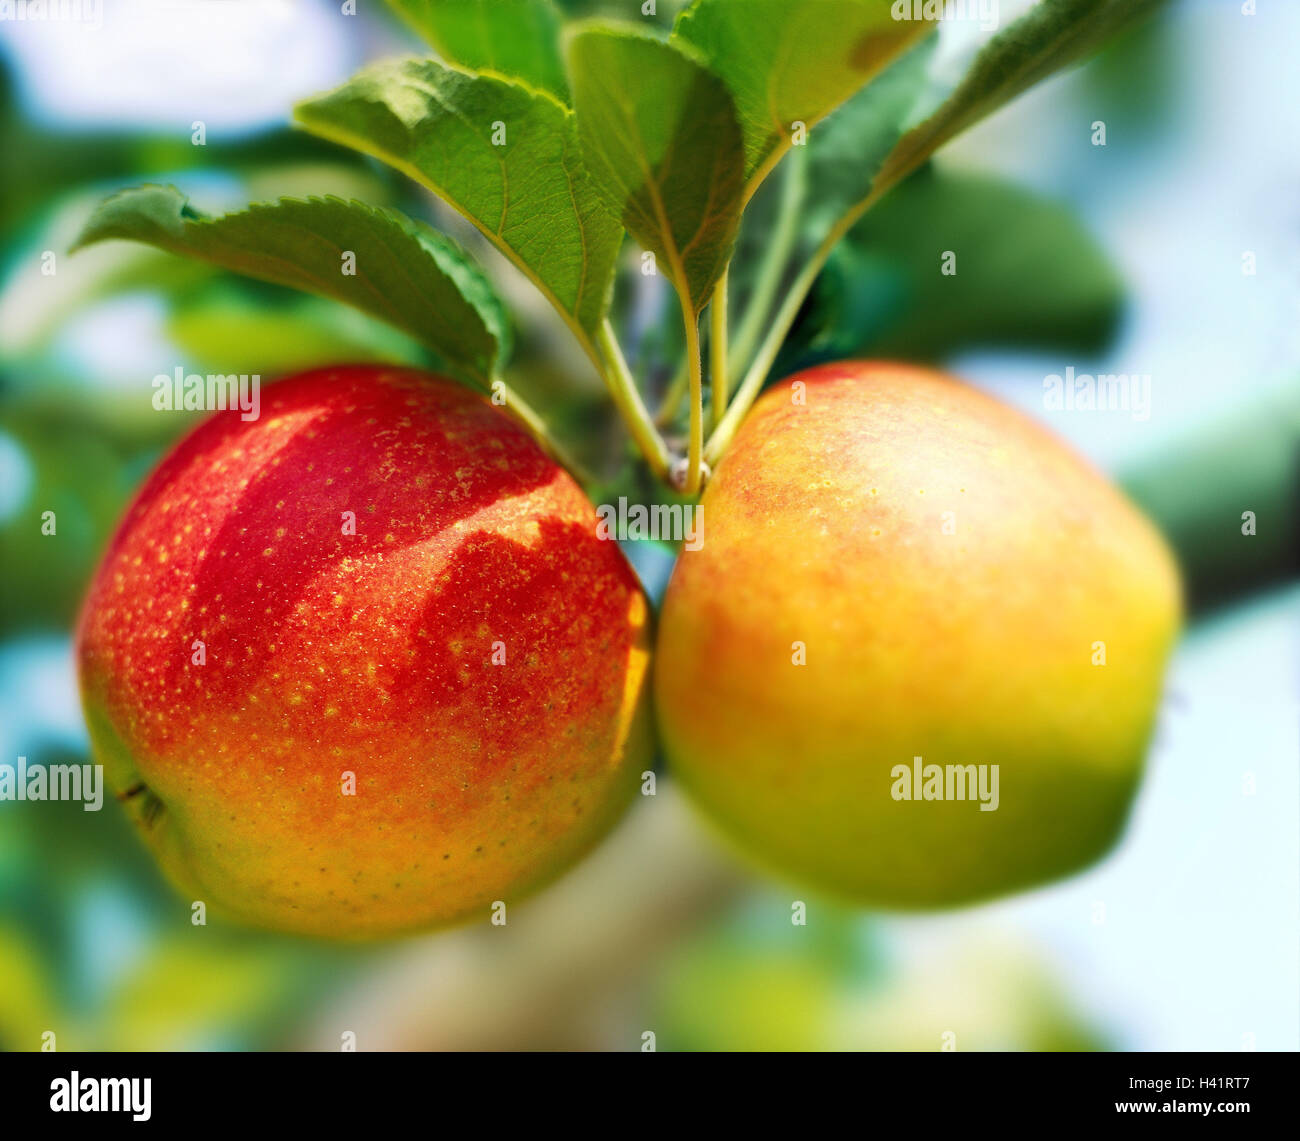 Apple-tree, branch, detail, apples 'Jonah's gold', tree, fruit-tree, fruits, pomes, fruit, winter apples, Malus spec., apple sort, maturation, mature, healthy, nutrition, healthy, rich in vitamins, fruit cultivation, plantation, fruit plantation, apple pl Stock Photo